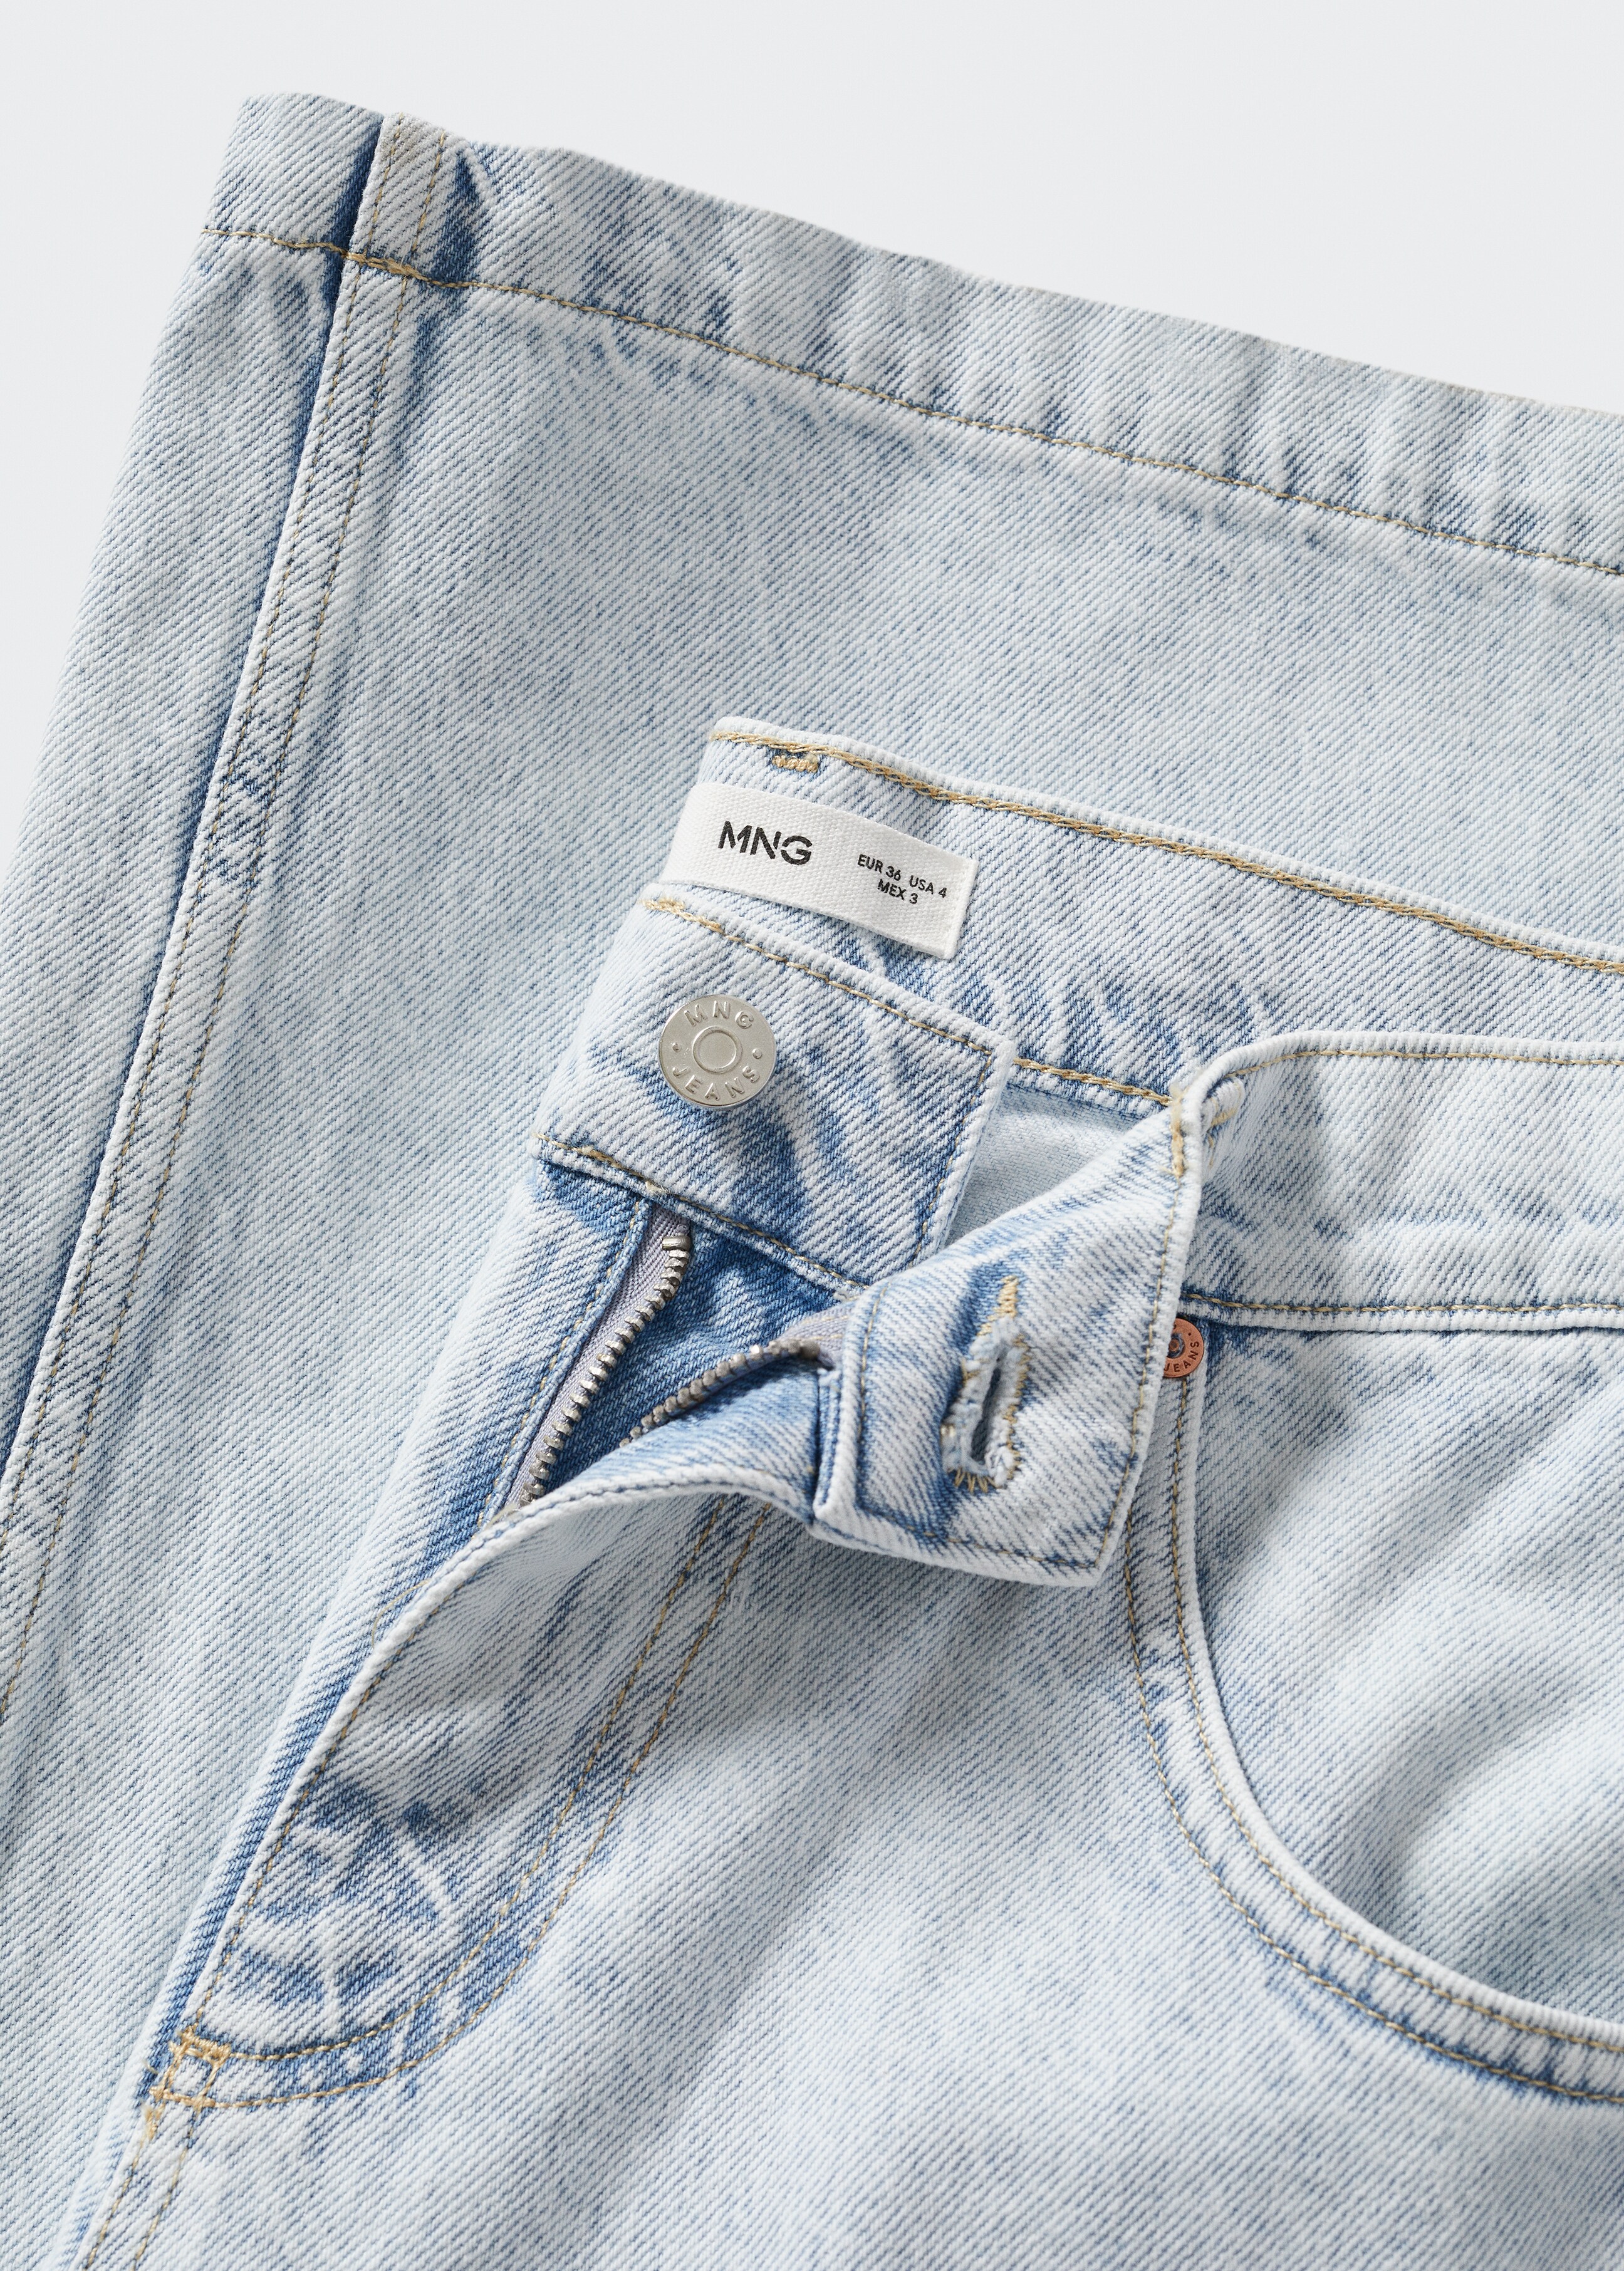 Decorative ripped wideleg jeans - Details of the article 8